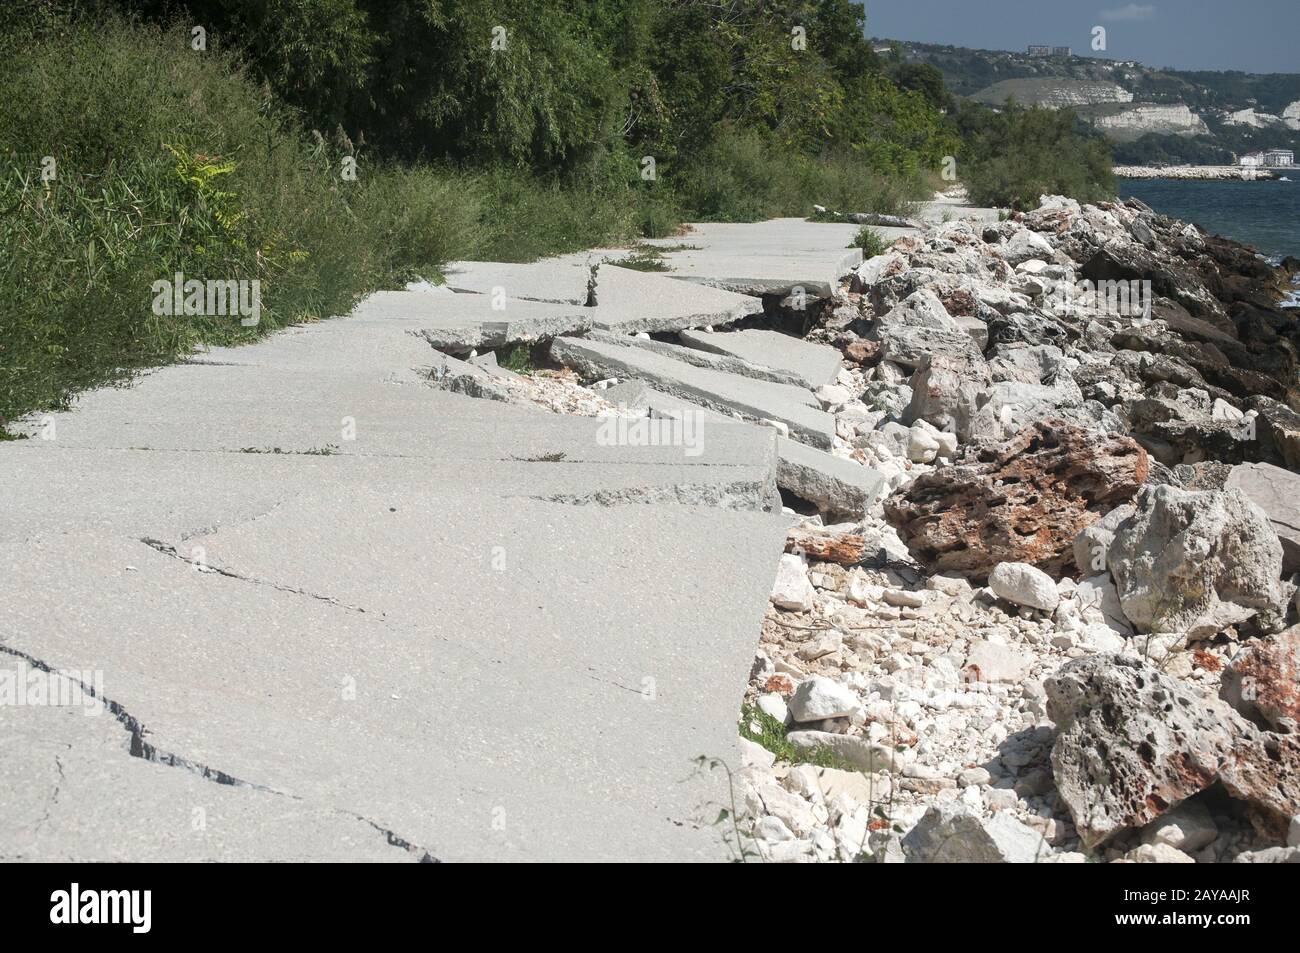 Destroyed by sea water erosion process seaside promenade concrete cover Stock Photo